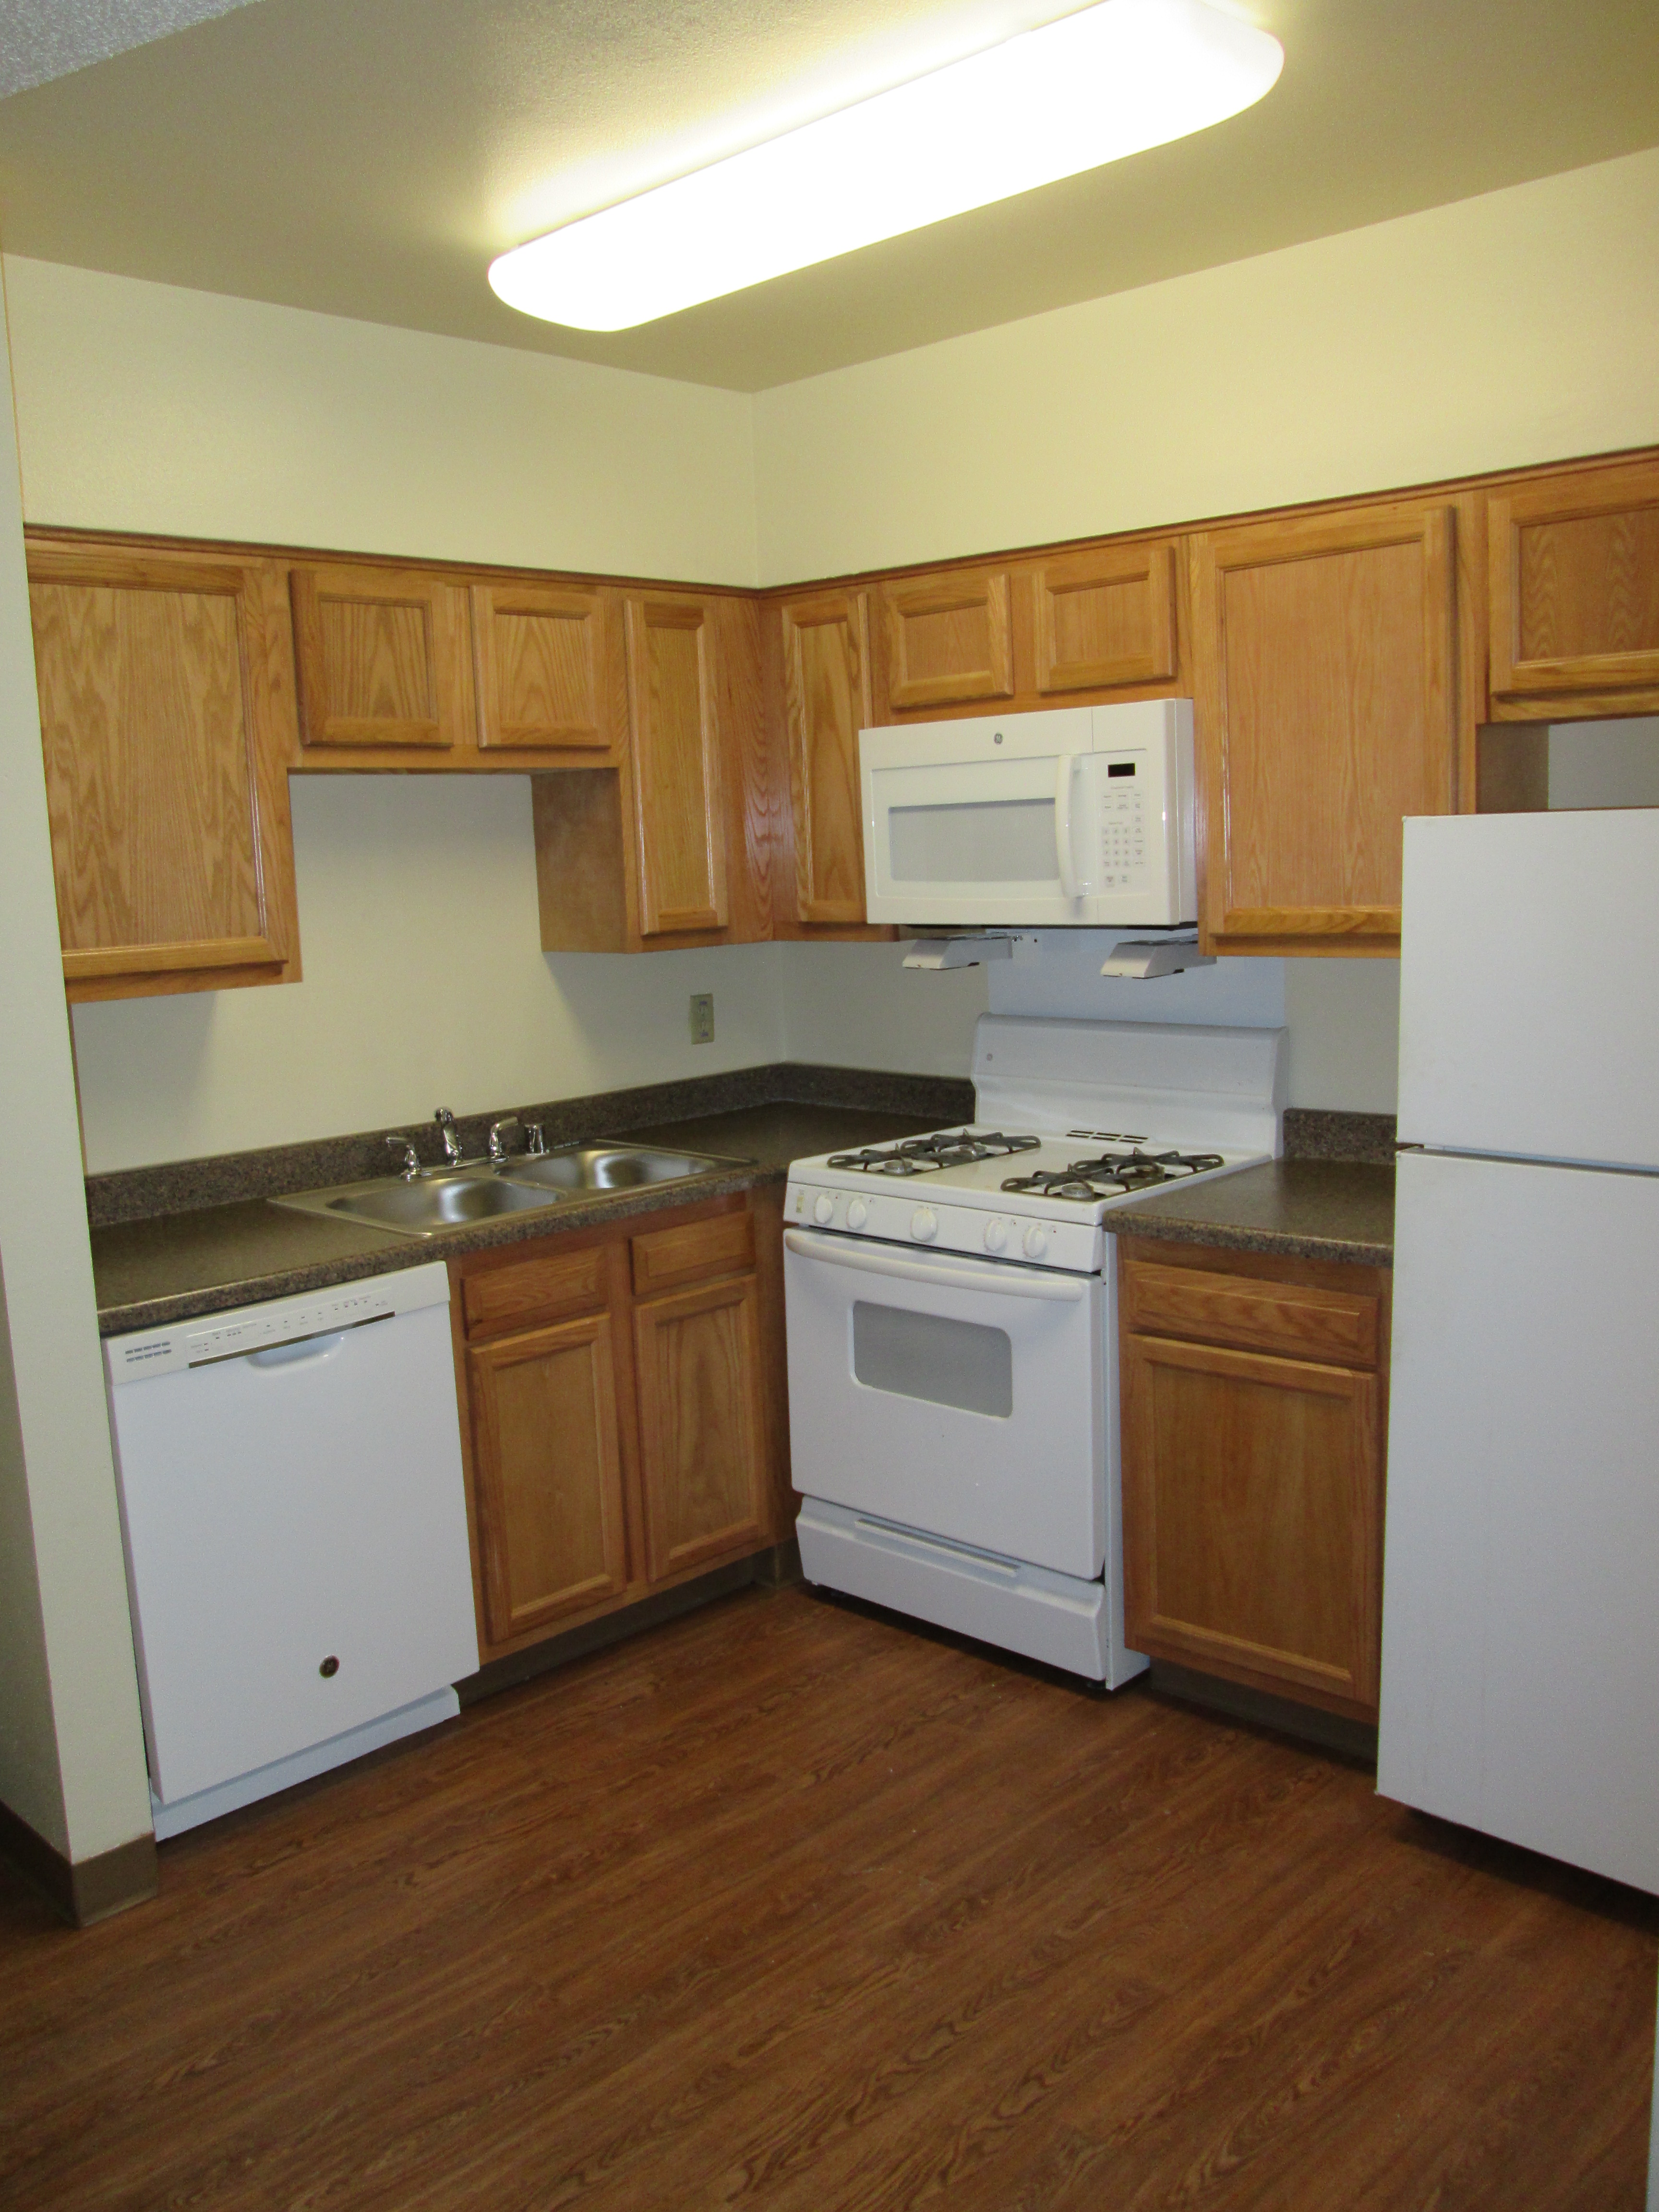 Image of the kitchen equipped with a dishwasher, microwave and a fridge